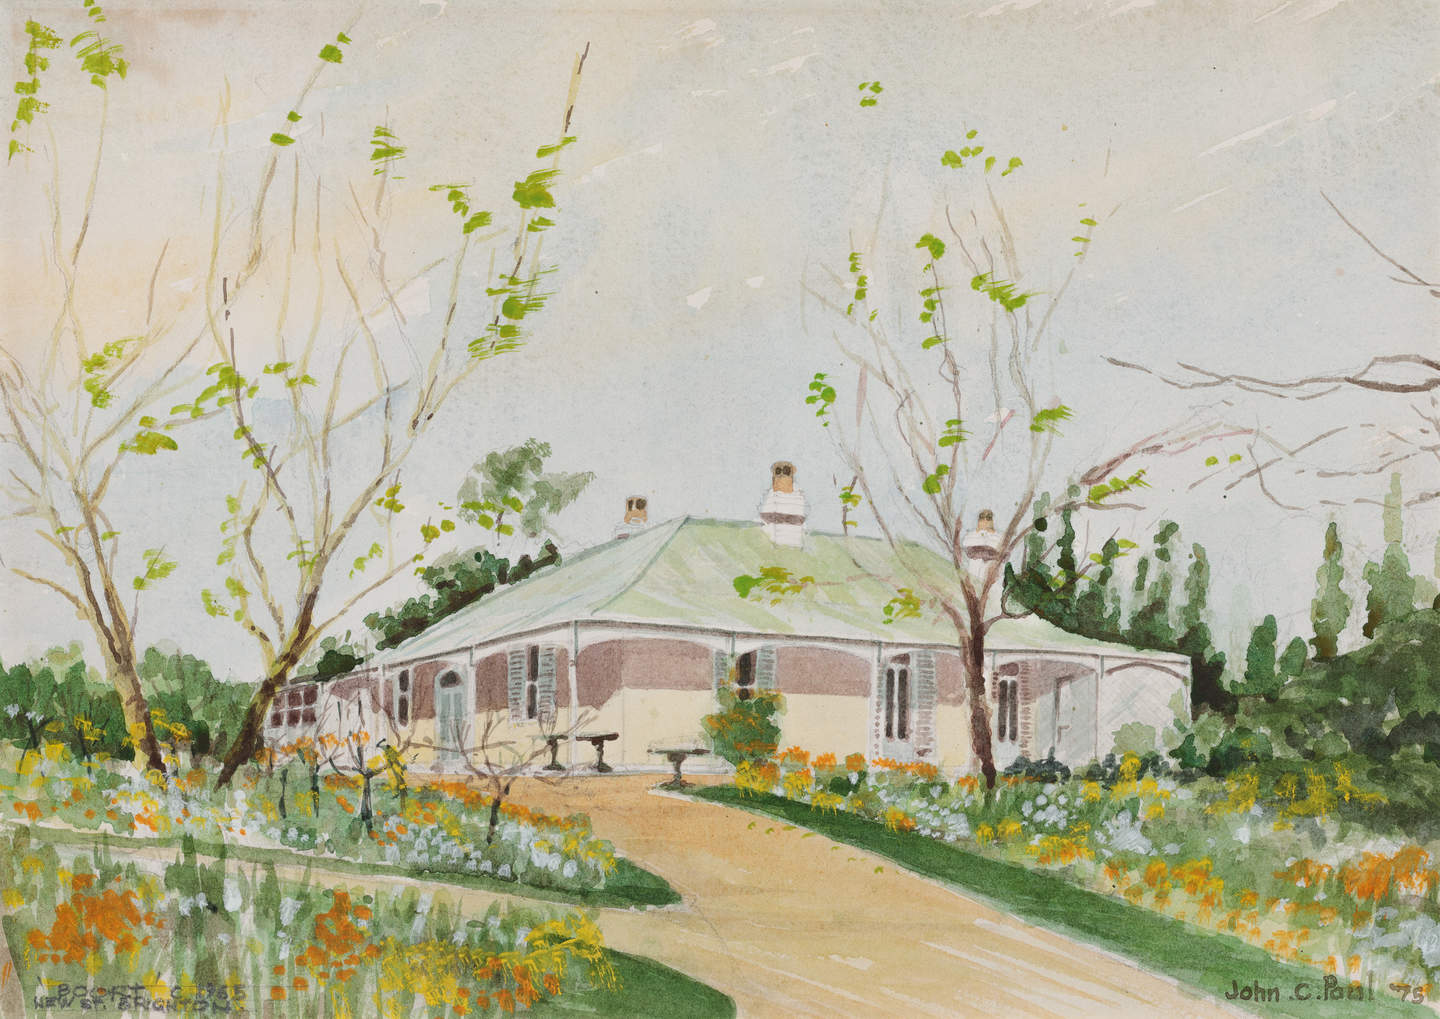 Watercolour of a white single story house with green roof and wrap around verandah. The house is surrounded by a garden of blooming flowers and two tall trees.